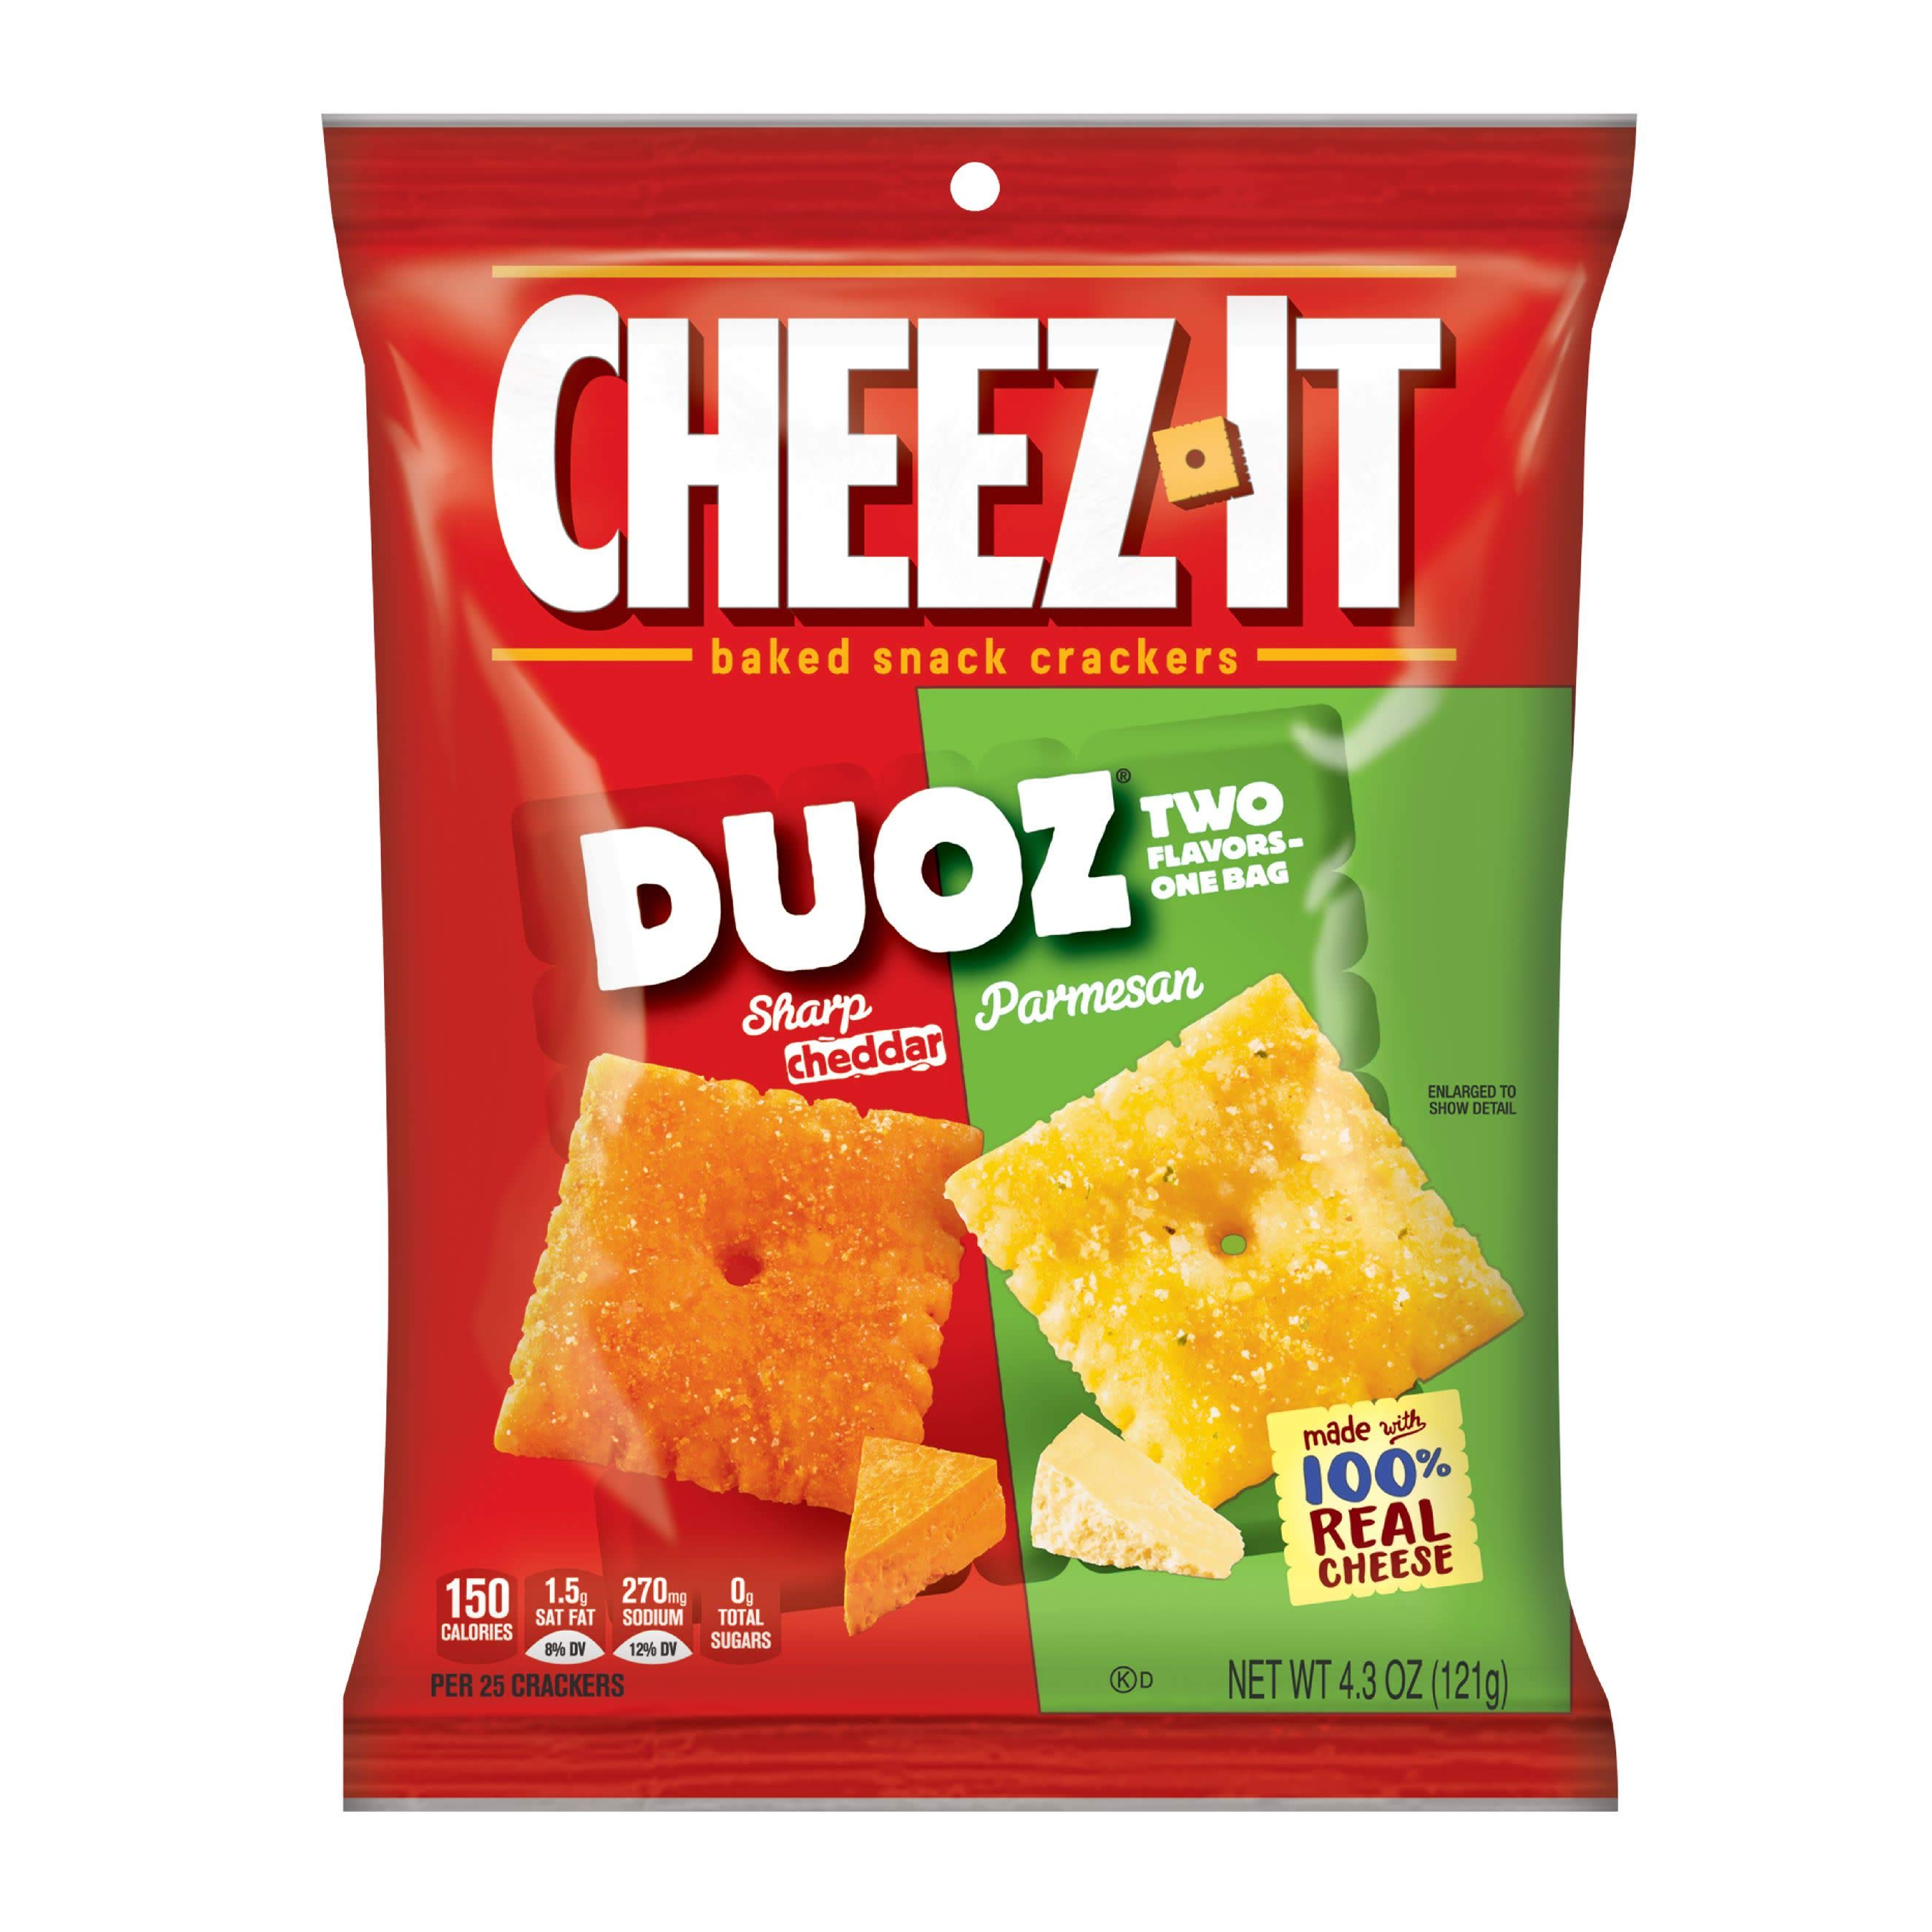 Cheez-It Duoz Sharp Cheddar & Parmesan Baked Snack Crackers 4.3oz